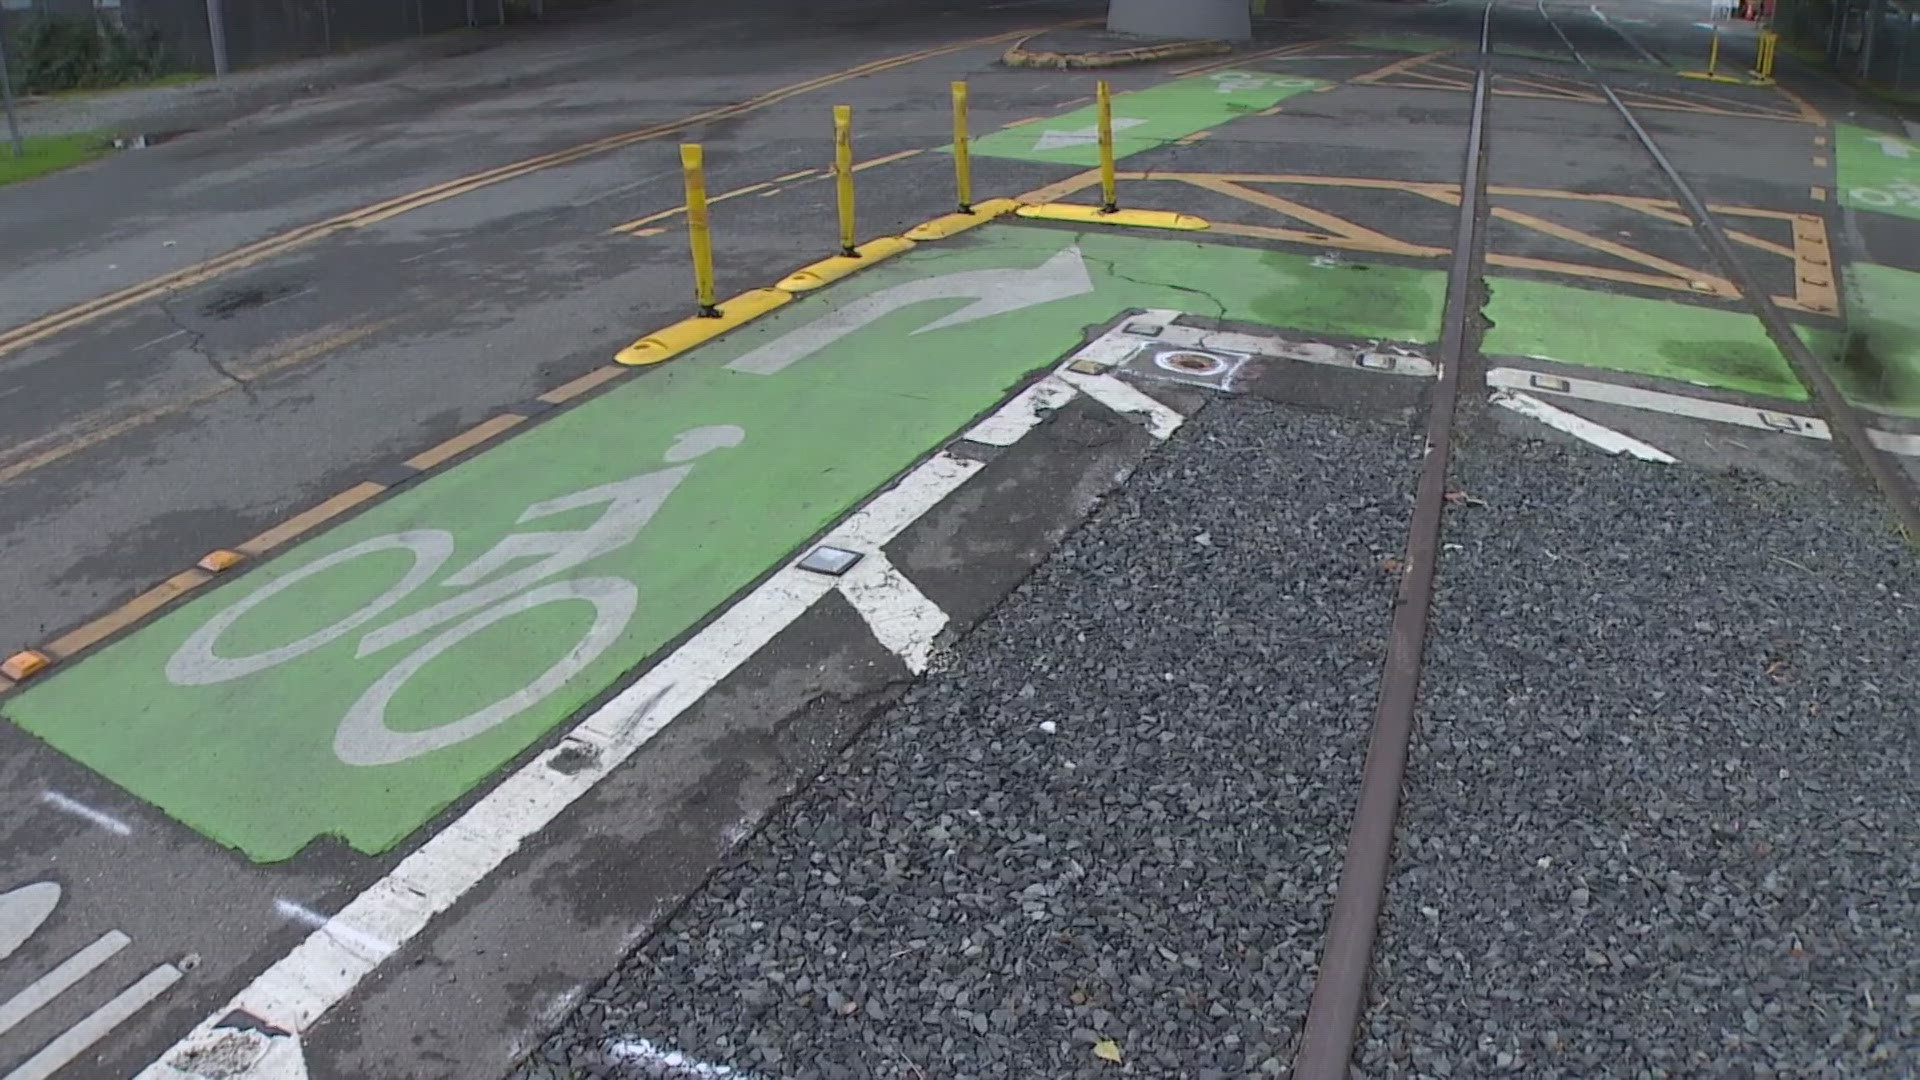 The legislation will allow SDOT to make safety improvements, including paving over the troublesome portion of the trail.